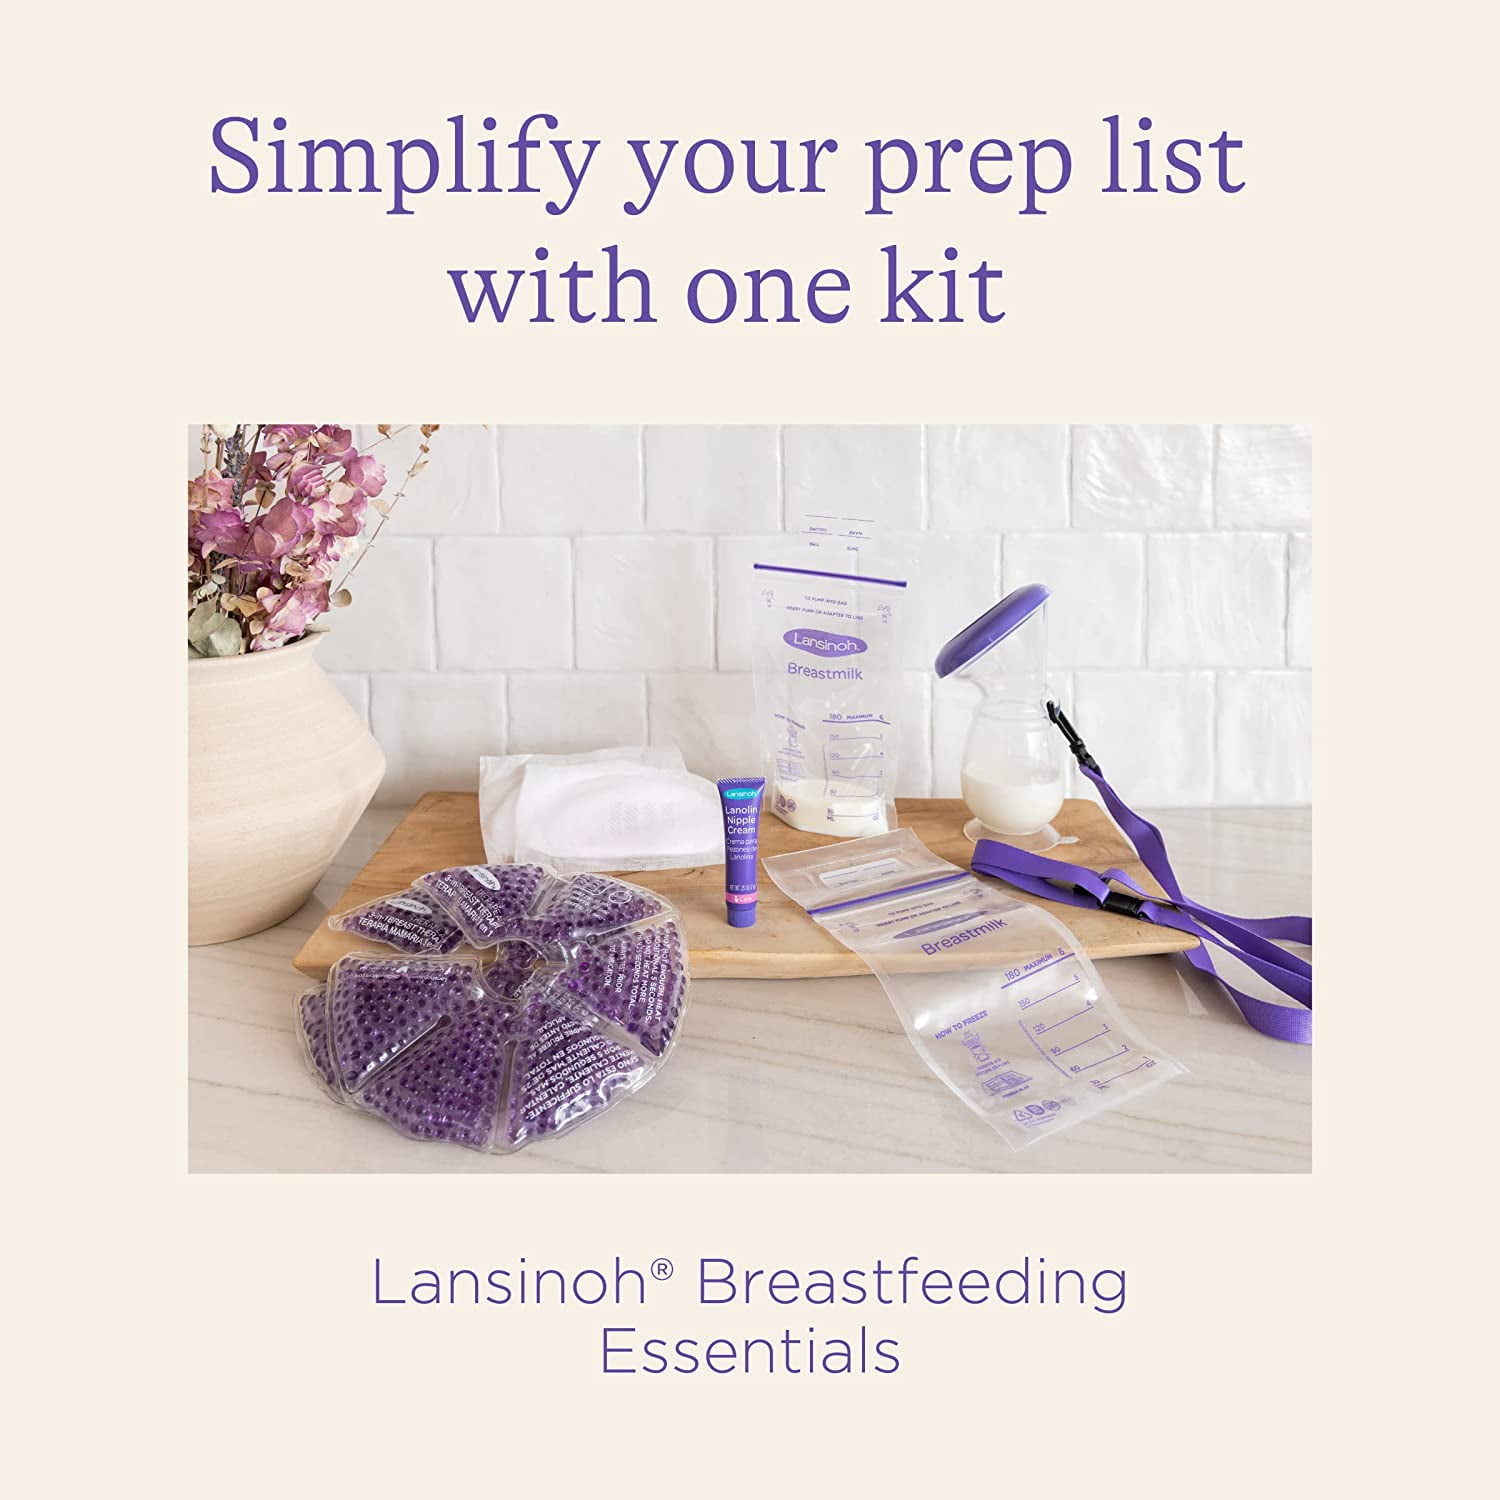 Lansinoh Breastfeeding Essentials Prize Pack #Giveaway - Mommy's Block Party